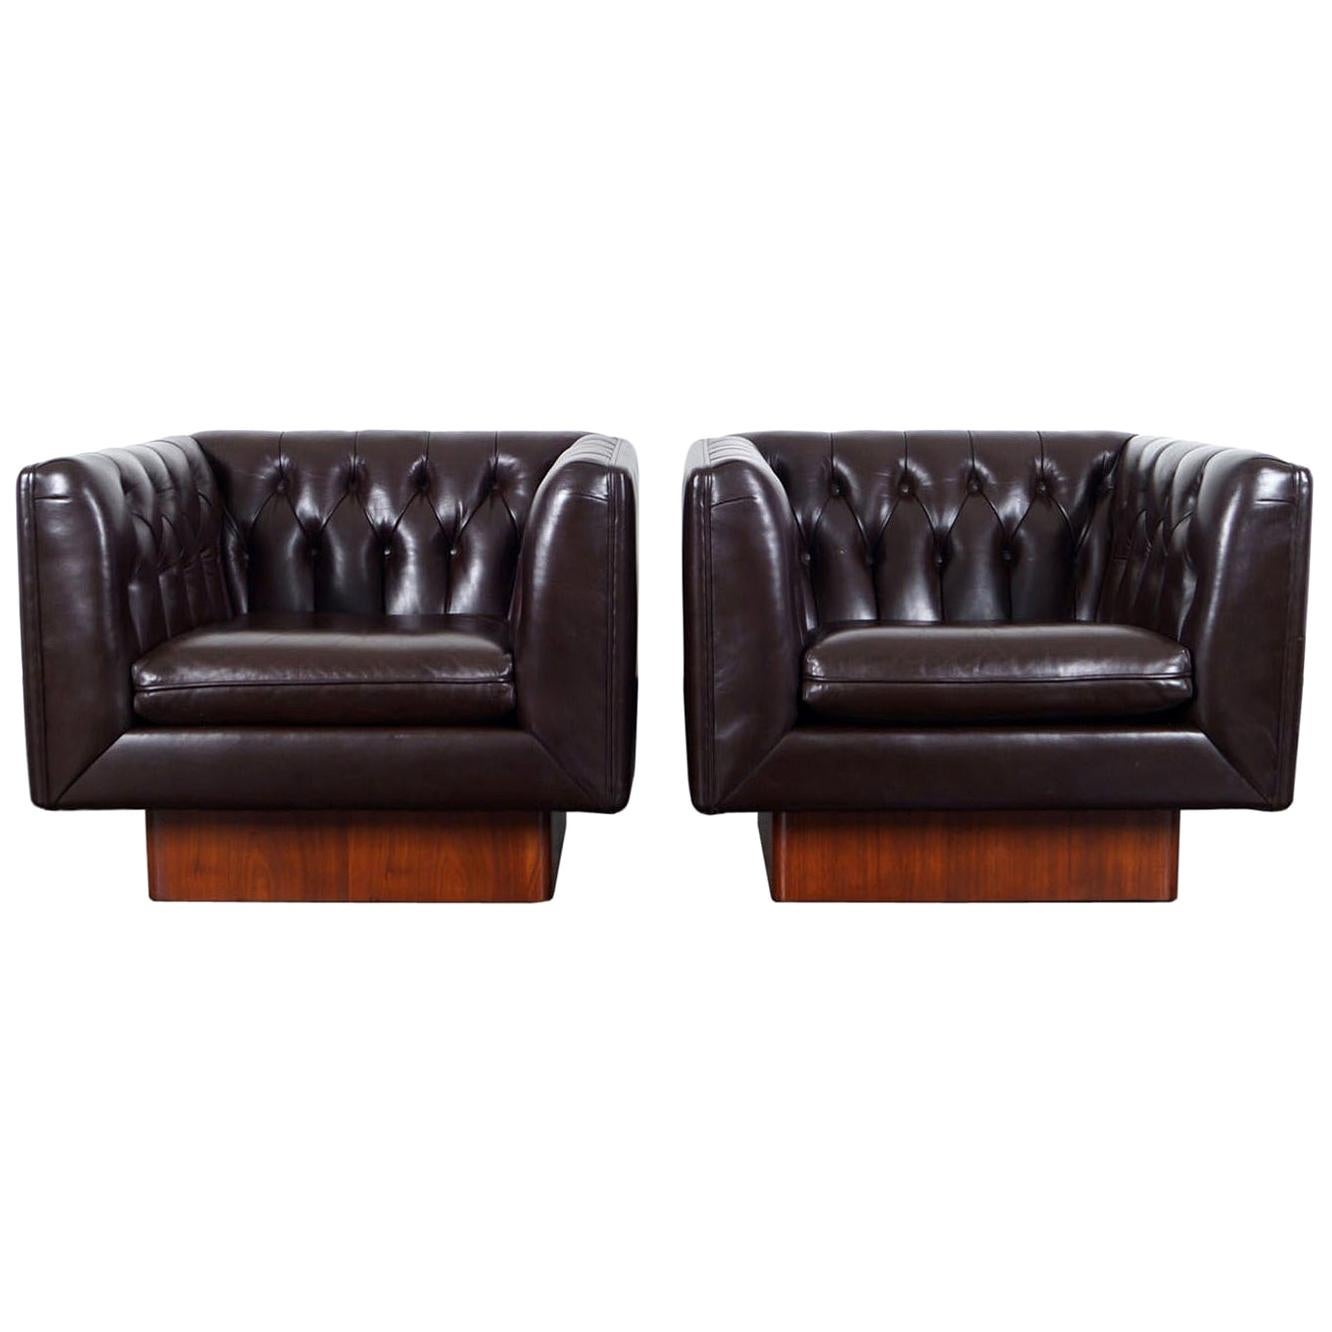 Vintage Tufted Leather Lounge Chairs by Milo Baughman